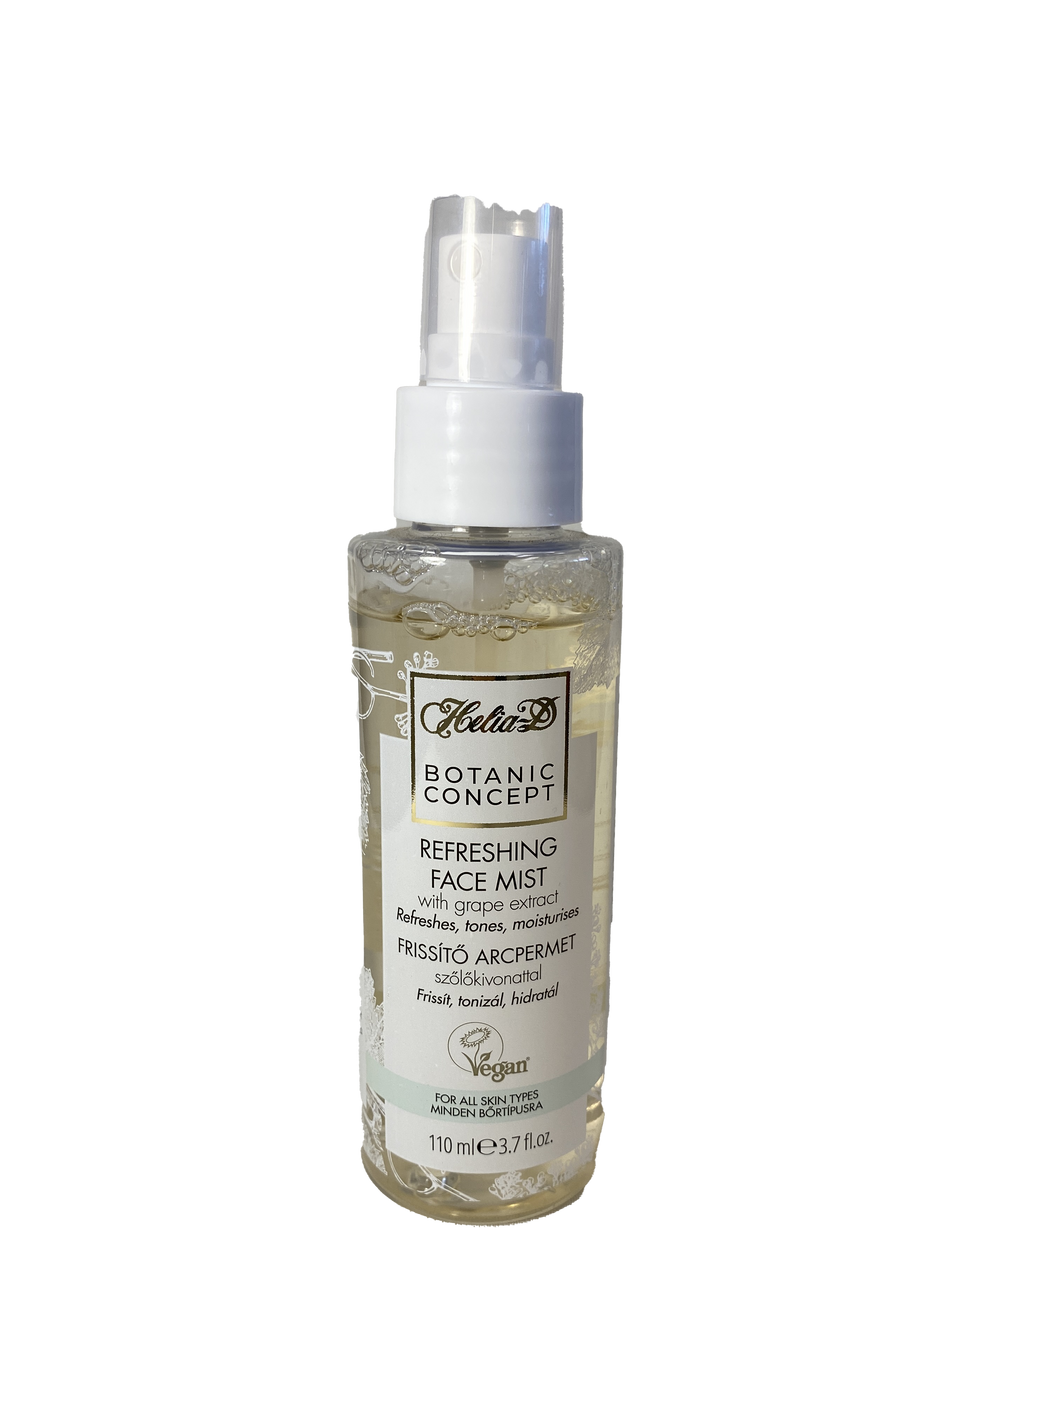 Refreshing Face Mist with grape extract (Refreshes, tones, moisturizes)